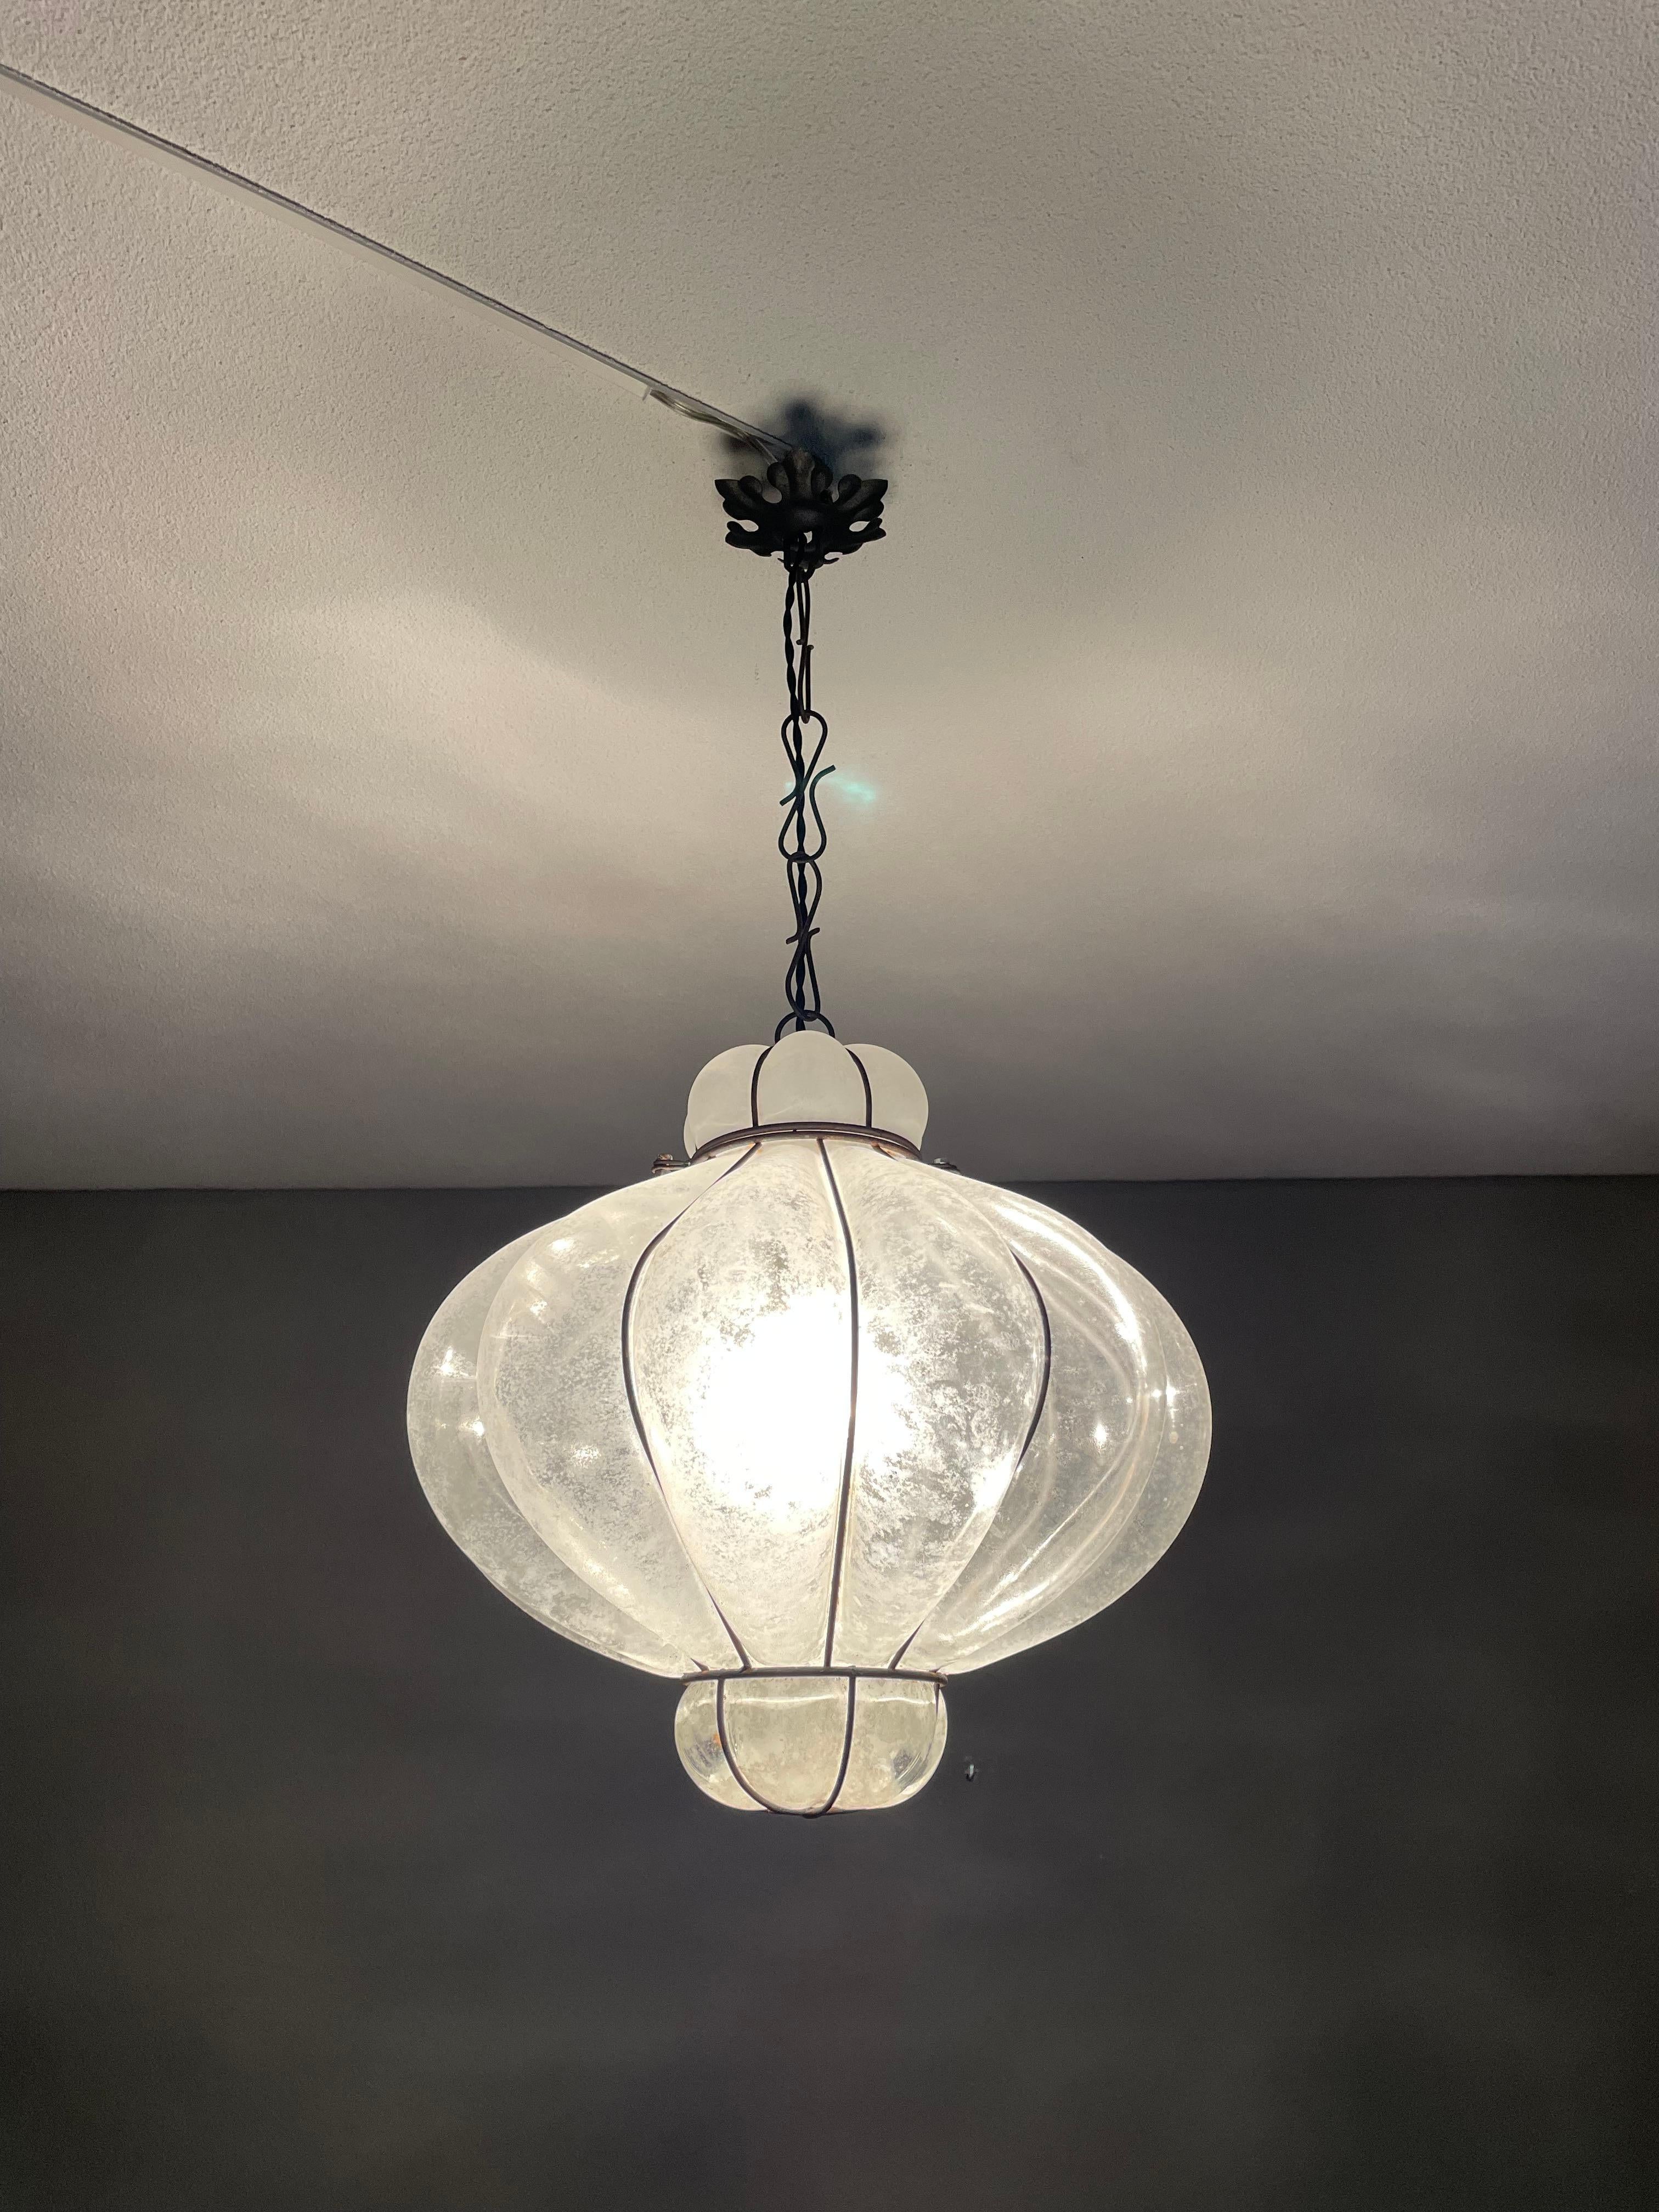 Beautiful midcentury made Italian light fixture.

This finer quality workmanship pendant from mid-20th century Italy is a real eyecatcher and both with the light switched on and off it is a real beauty to look at. Especially with the light switched